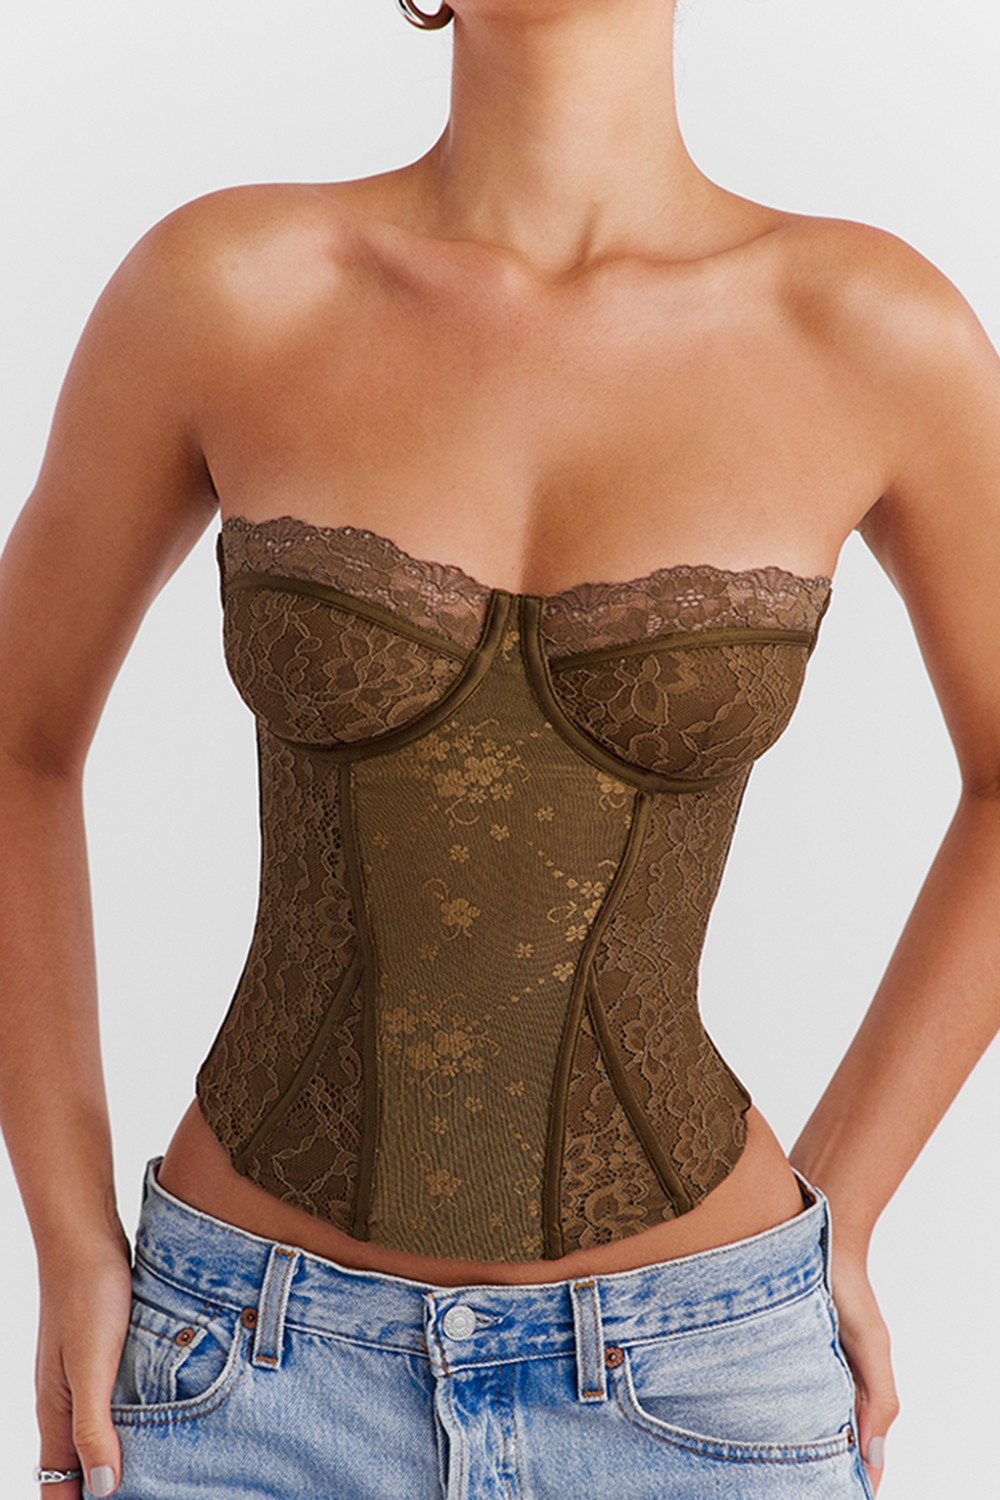 ,Mistress Rocks Olive Green Lace Underwired Corset